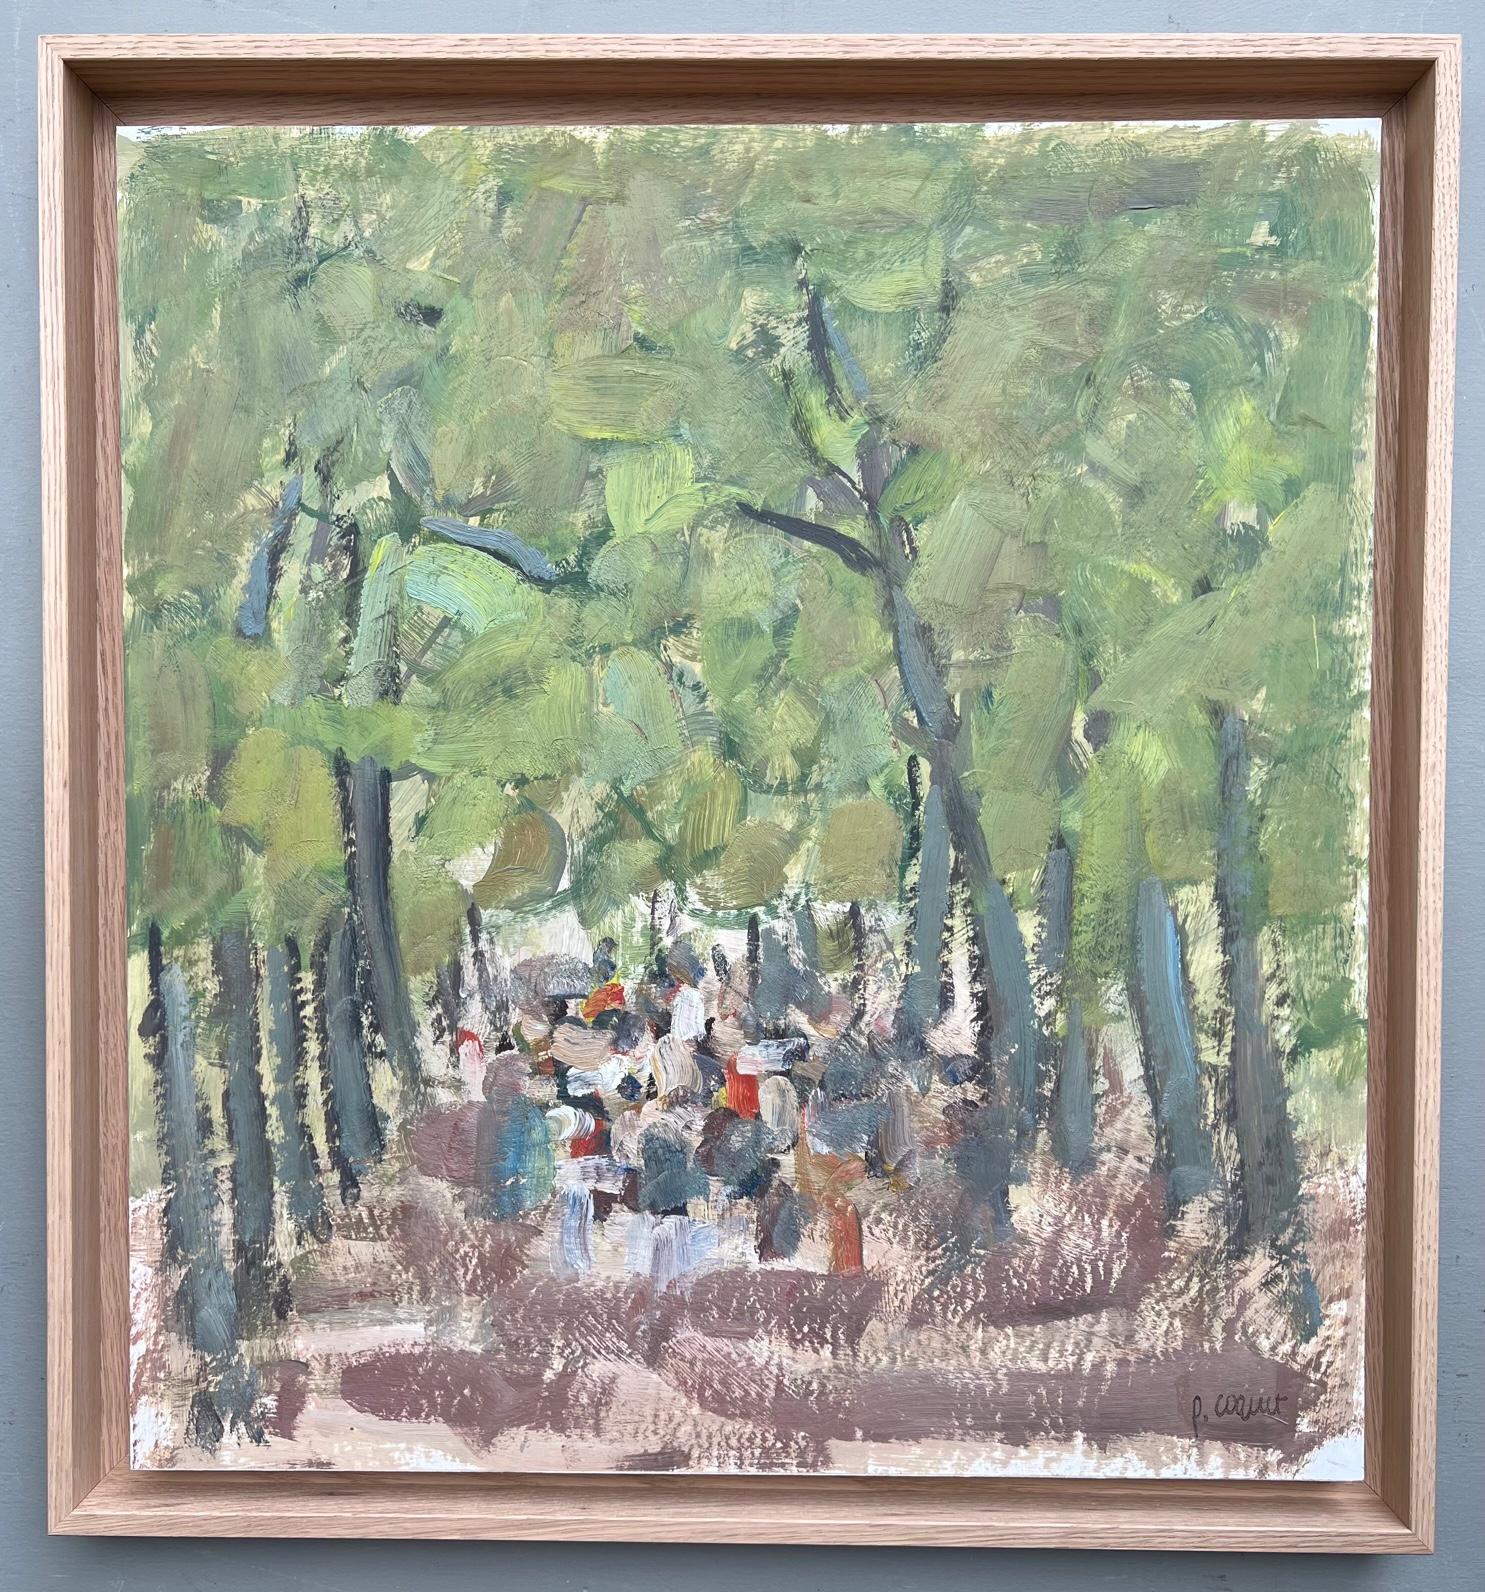 Pierre Coquet - Characters at the edge of the wood
Reference number F382
Framed with a natural oak floated frame.
53 x 50 cm frame included (48 x 45 cm without frame)
This work is painted with oil on a paper that is mounted on a board and placed in